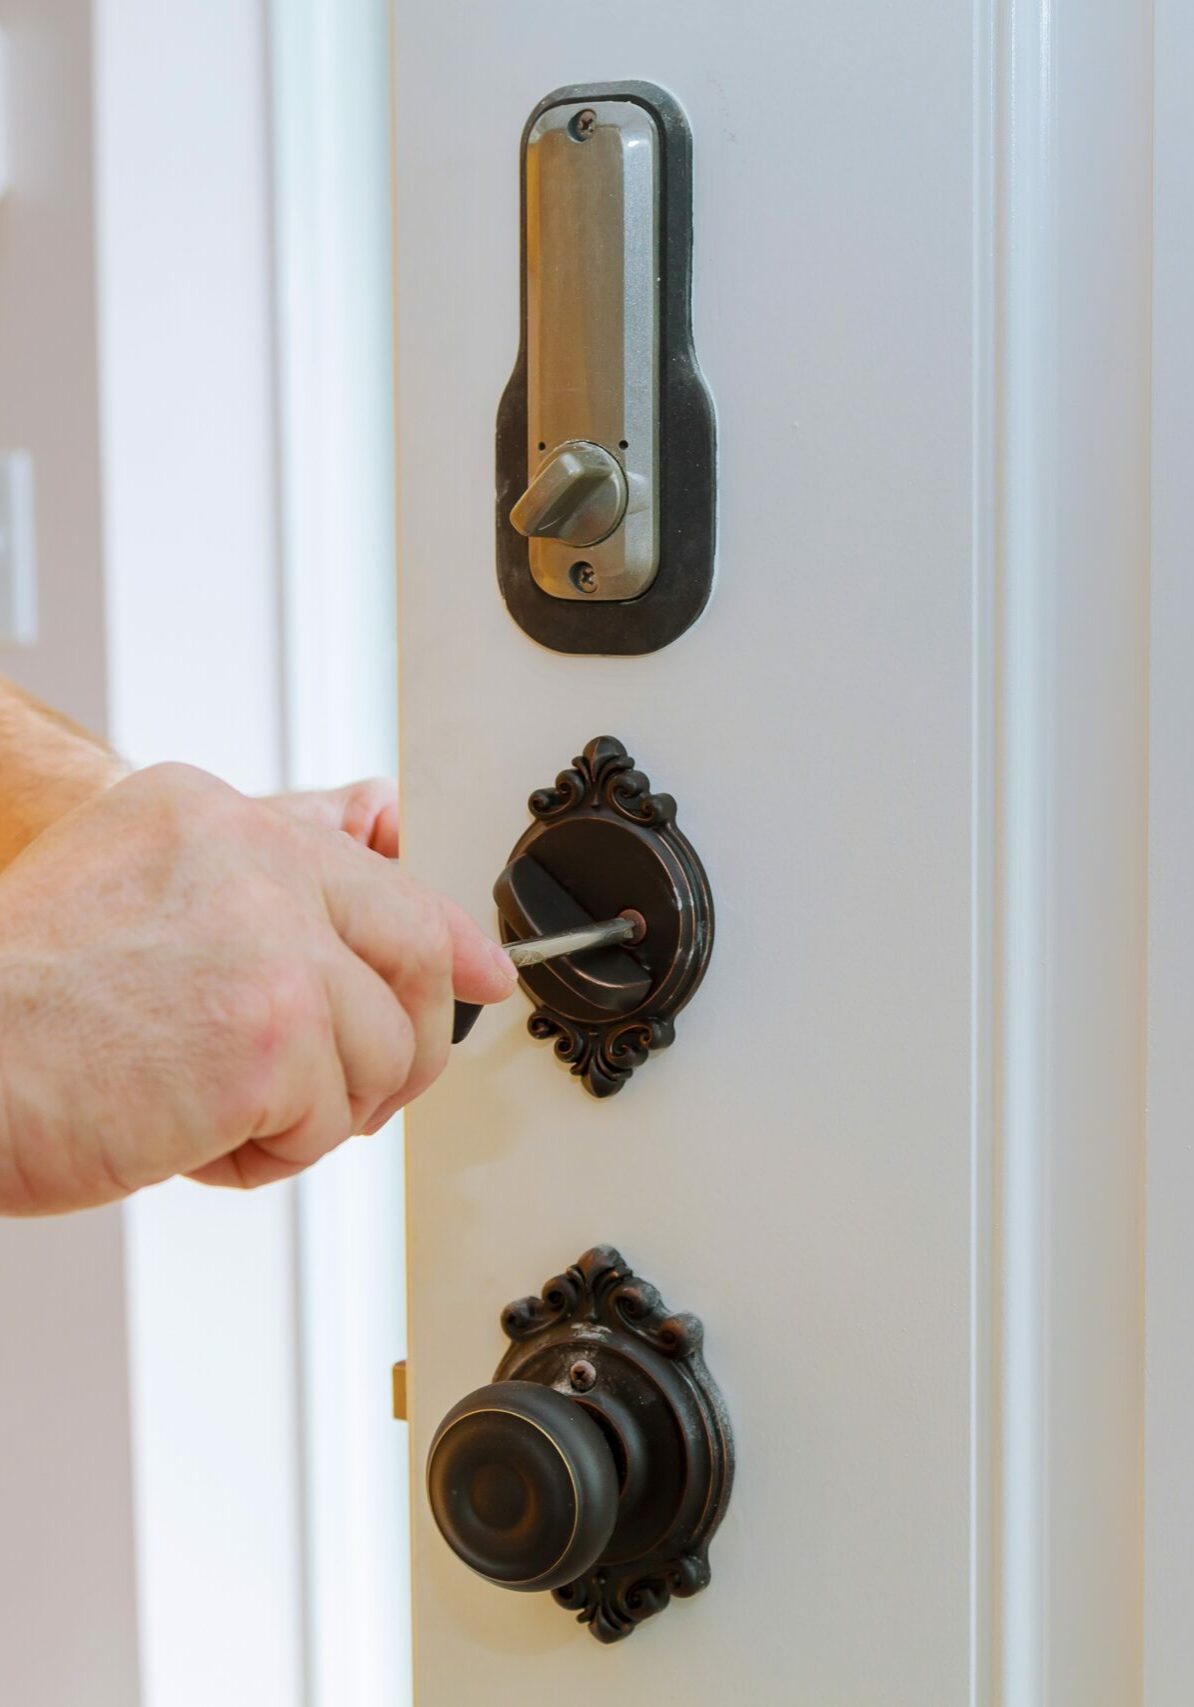 Closeup of a professional locksmith installing or repairing a new deadbolt lock on a house door with the inside internal parts of the lock visible.